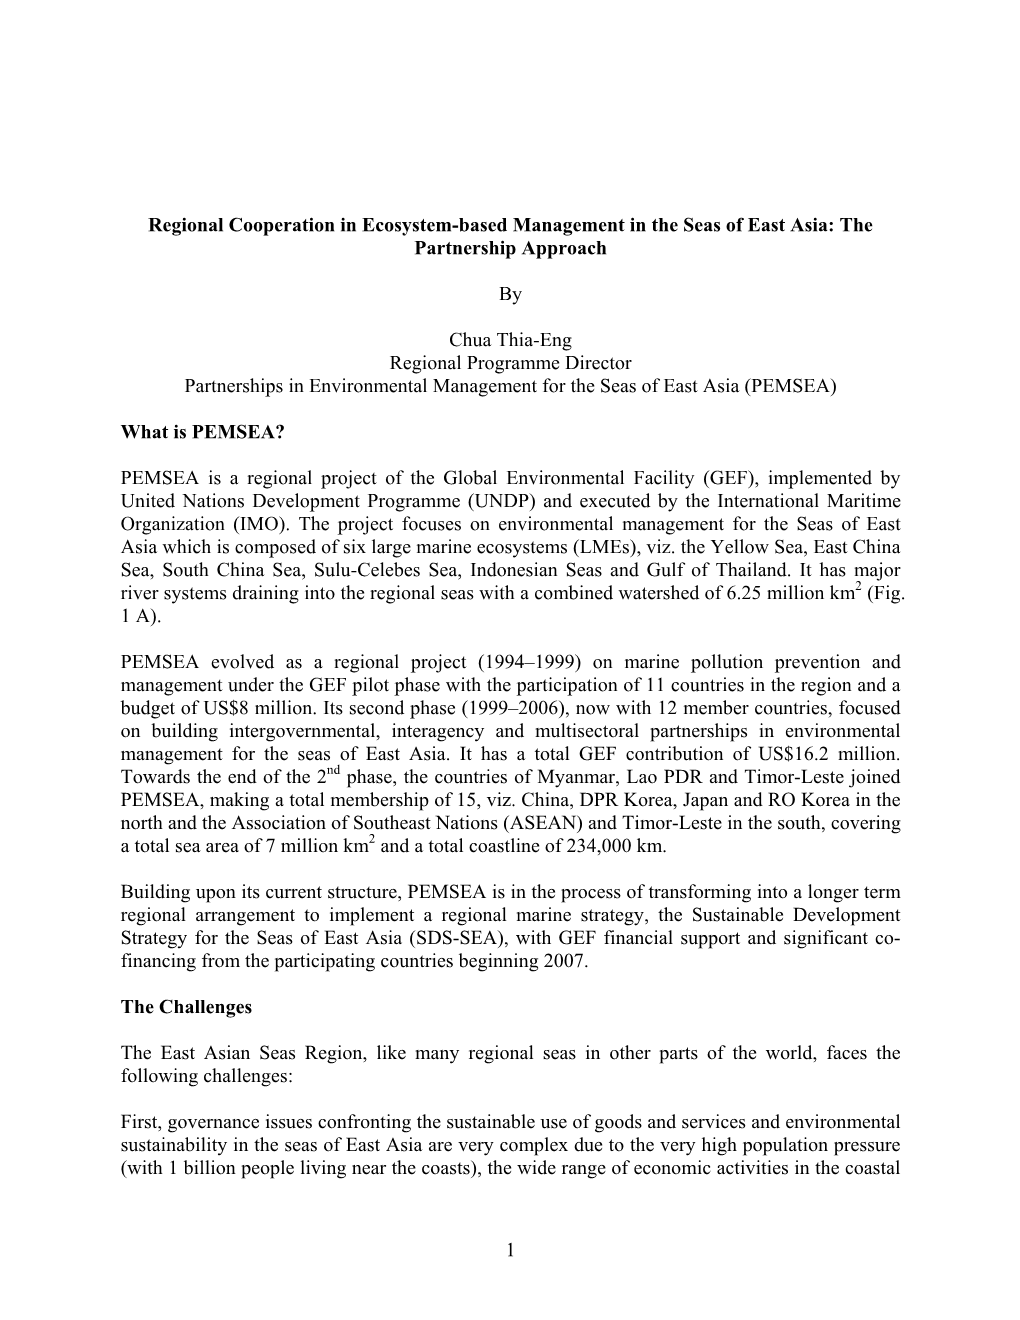 1 Regional Cooperation in Ecosystem-Based Management in the Seas of East Asia: the Partnership Approach by Chua Thia-Eng Regi